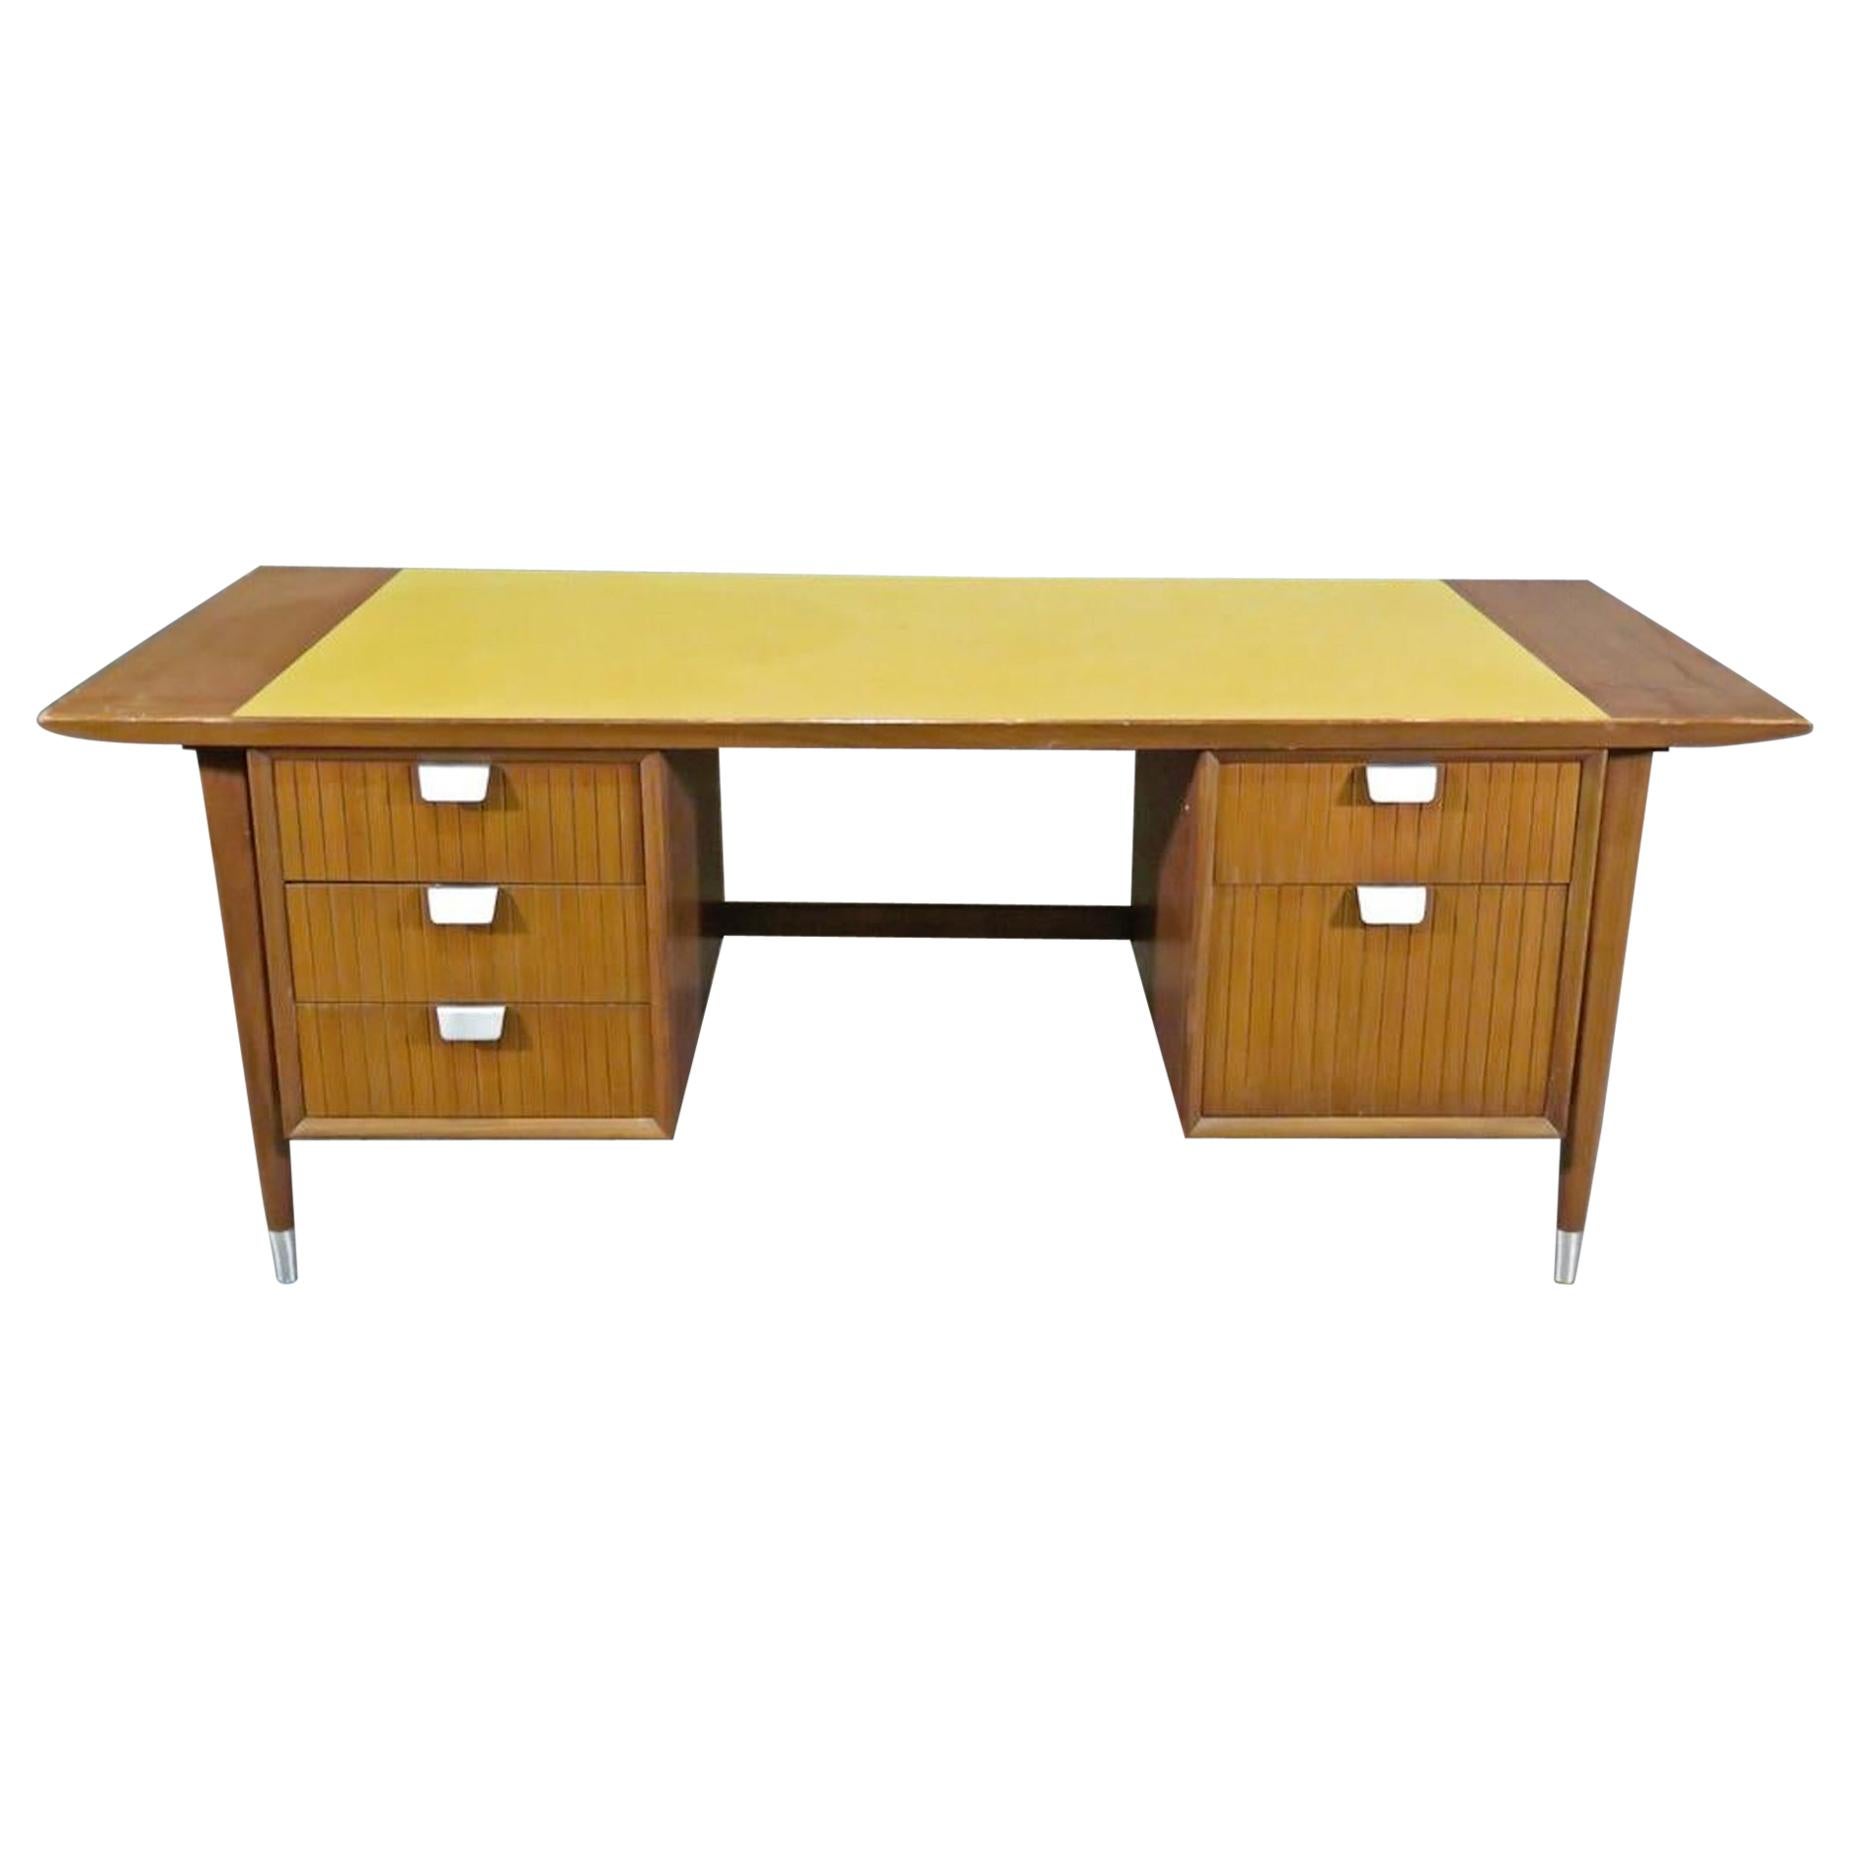 Modern style executive desk with yellow formica top, metal handles and cane back.
(Please confirm item location - NY or NJ - with dealer).
 